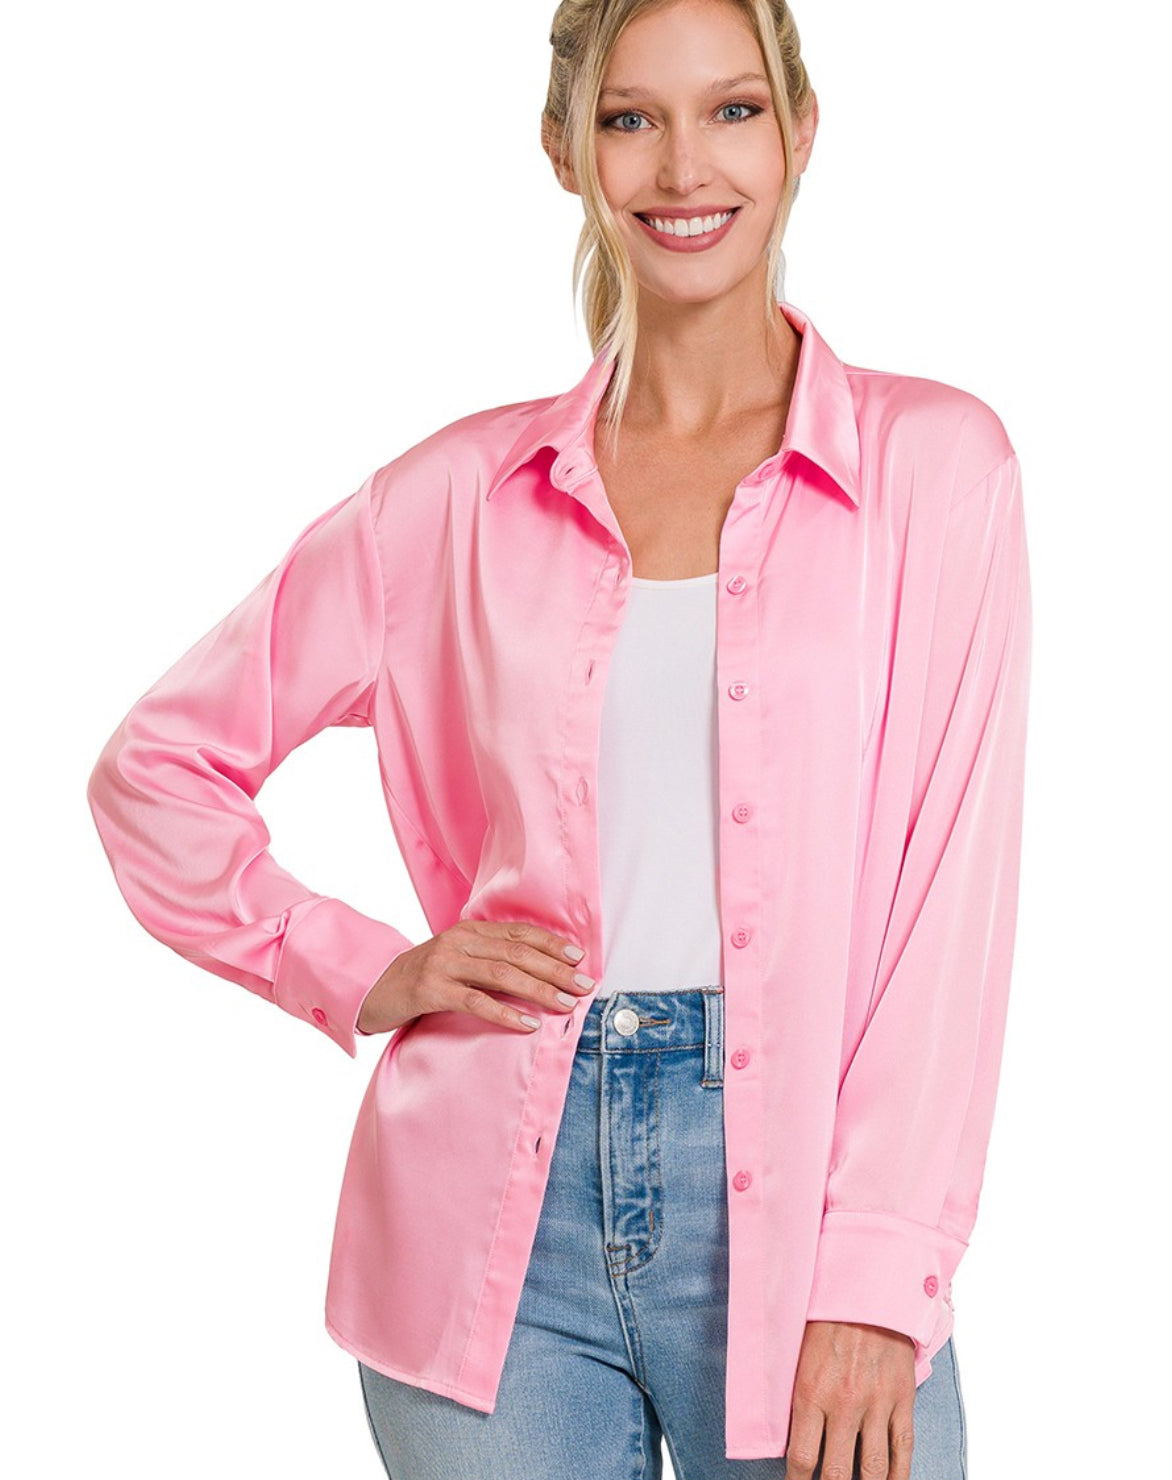 Satin Charmeuse Button Shirt in Pink